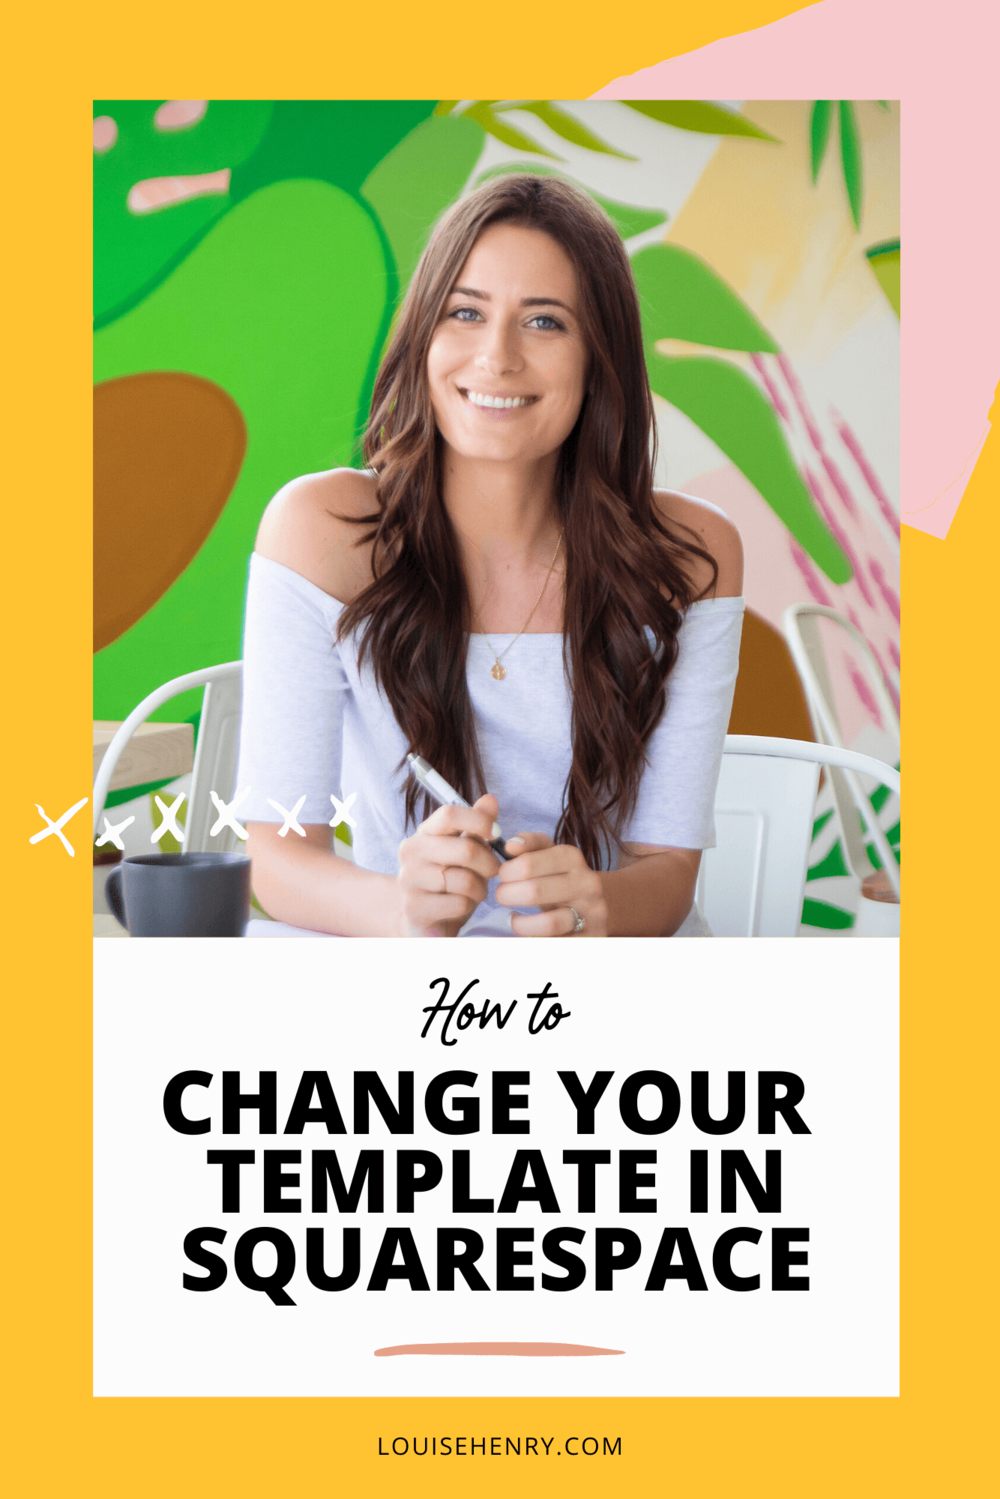 how-to-change-templates-in-squarespace-version-7-0-louise-henry-tech-expert-online